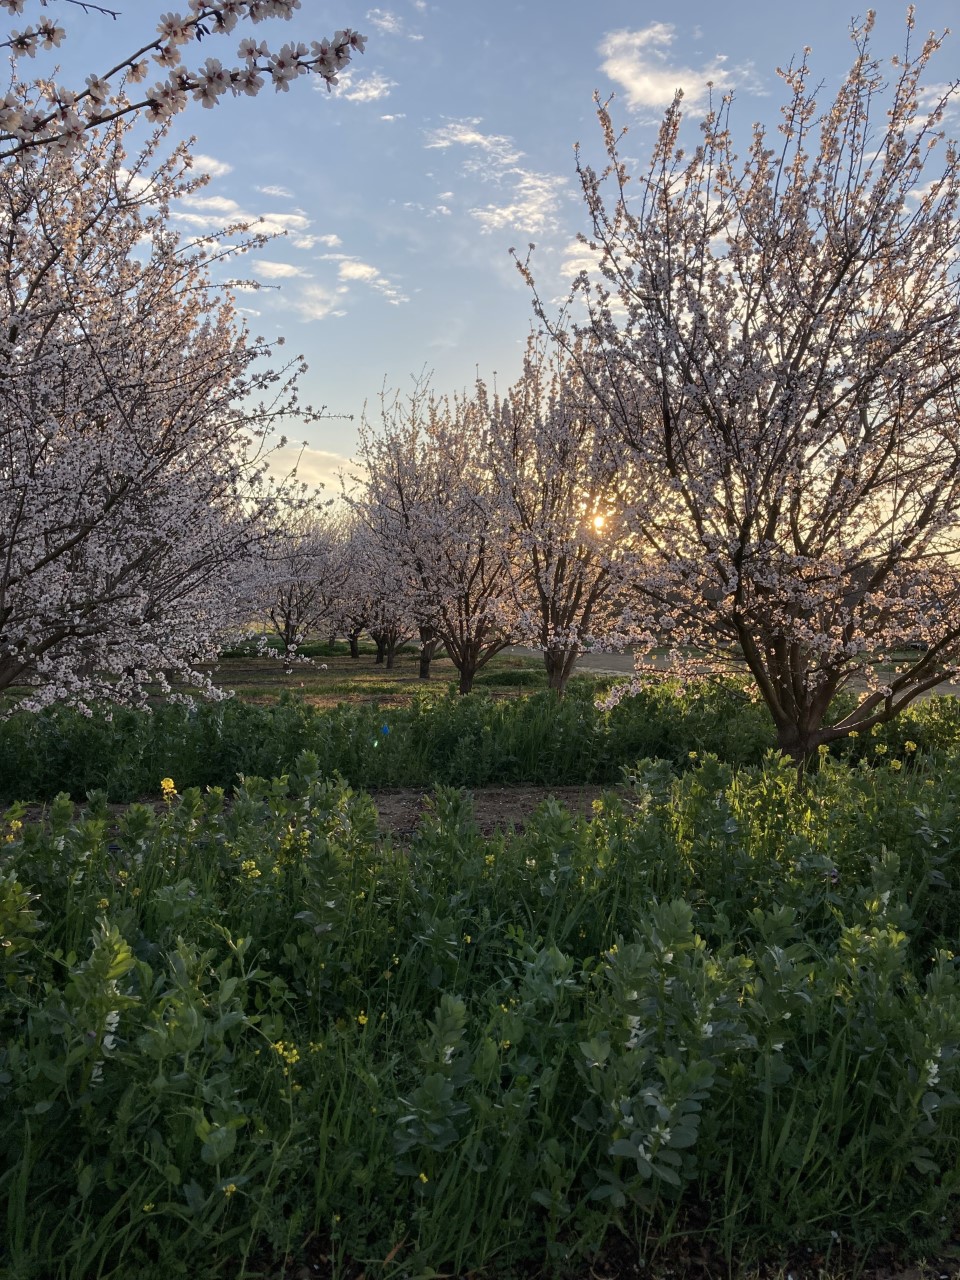 A view of lush grassy plants growing in orchard between two rows of trees covered with pale pink blooms.